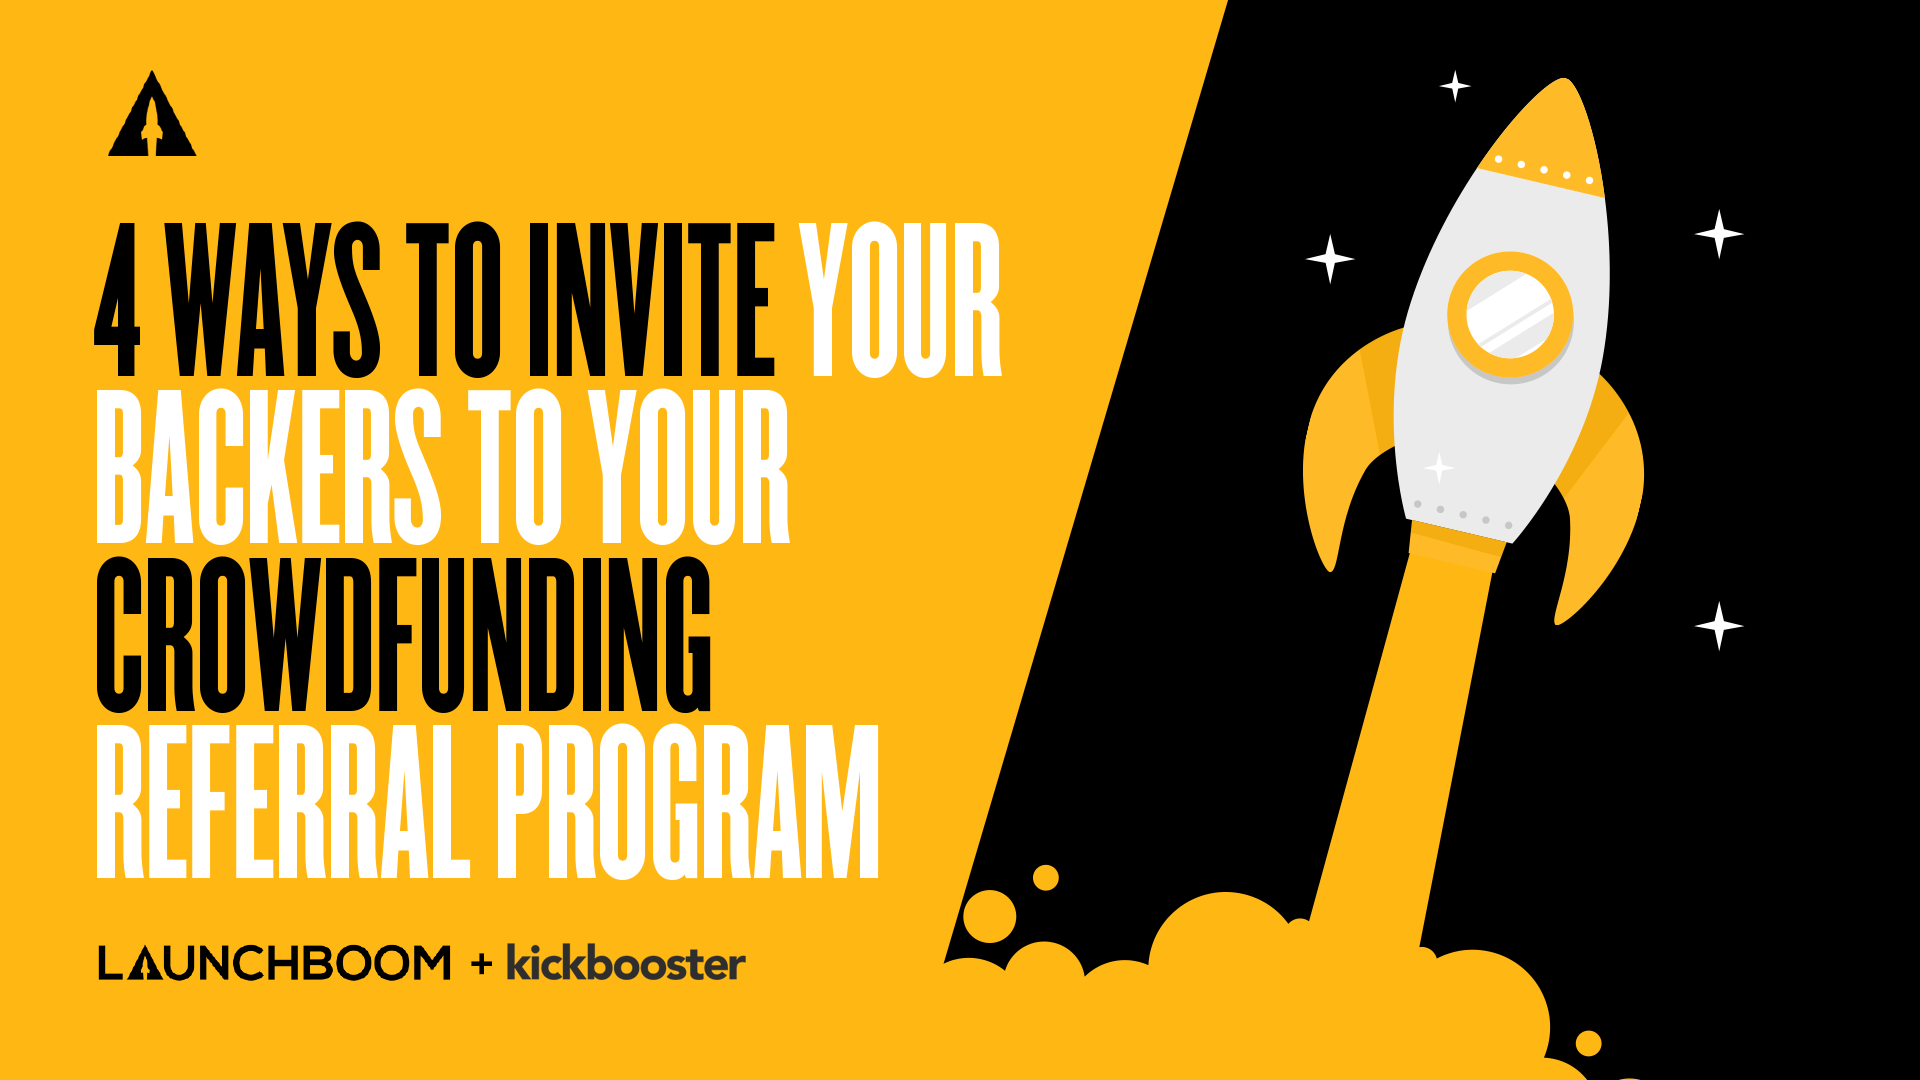 Invite backers to your crowdfunding referral program with Kickbooster